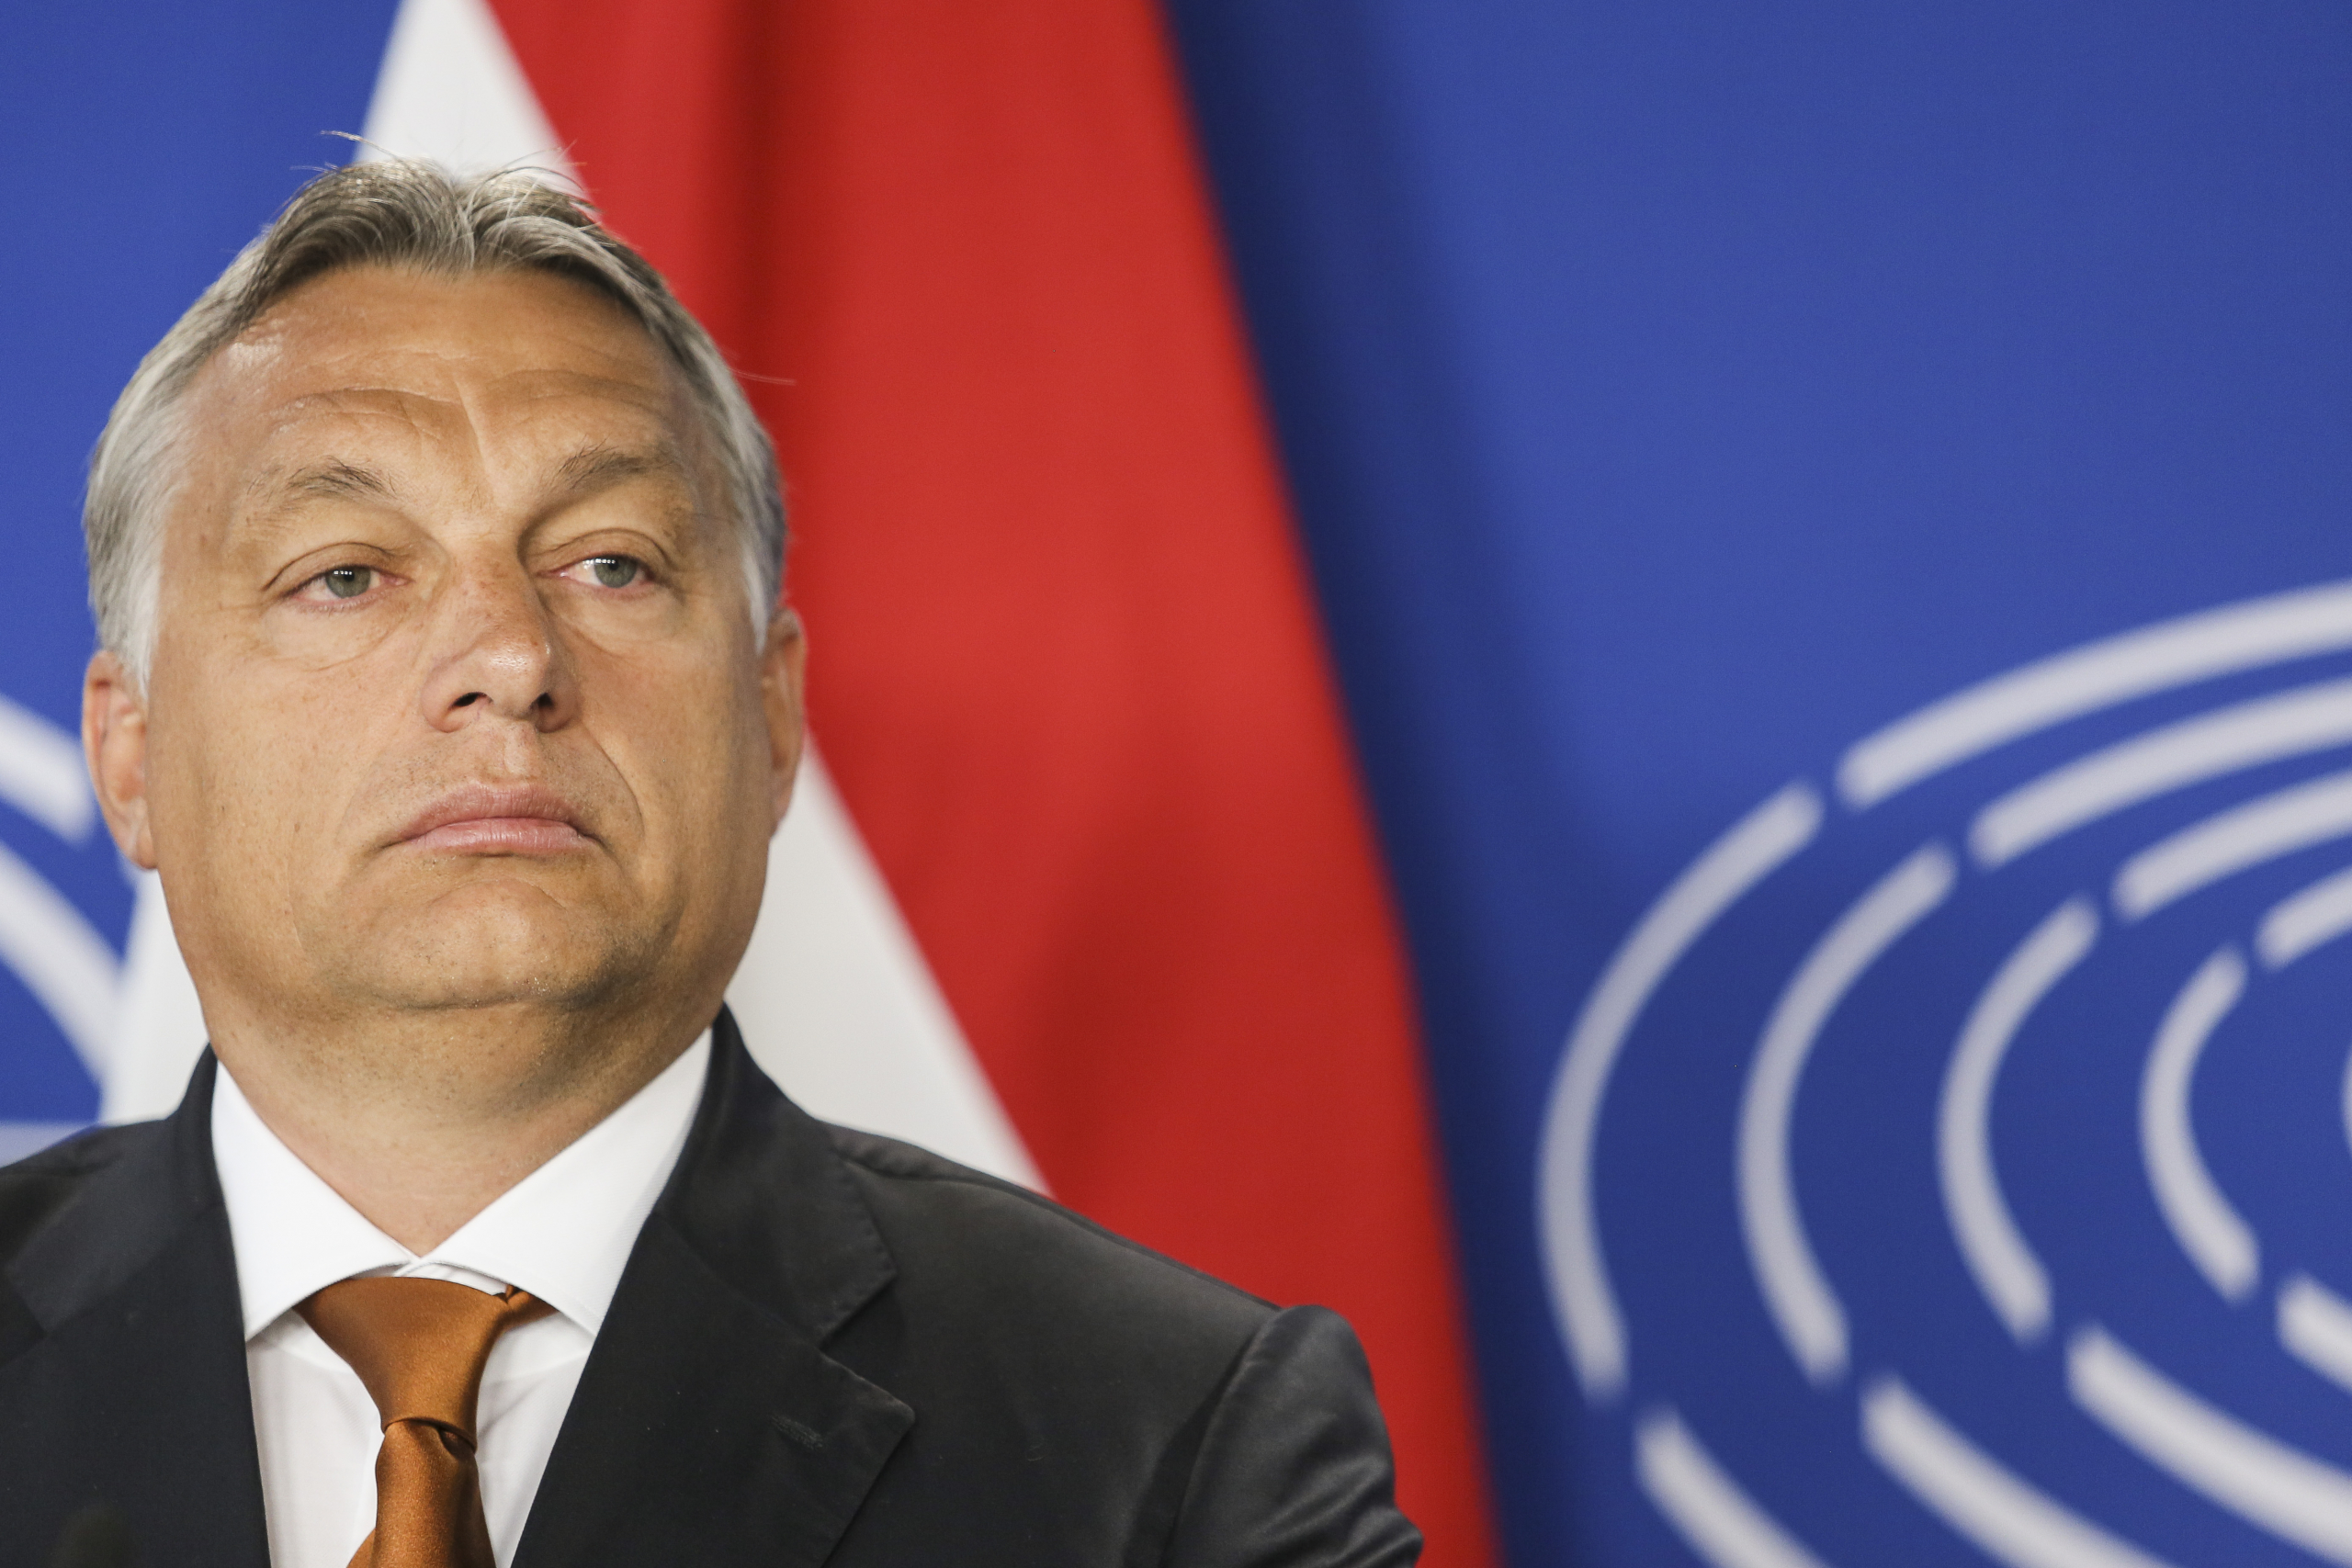 Orbán signs in Brussels what he protests at home